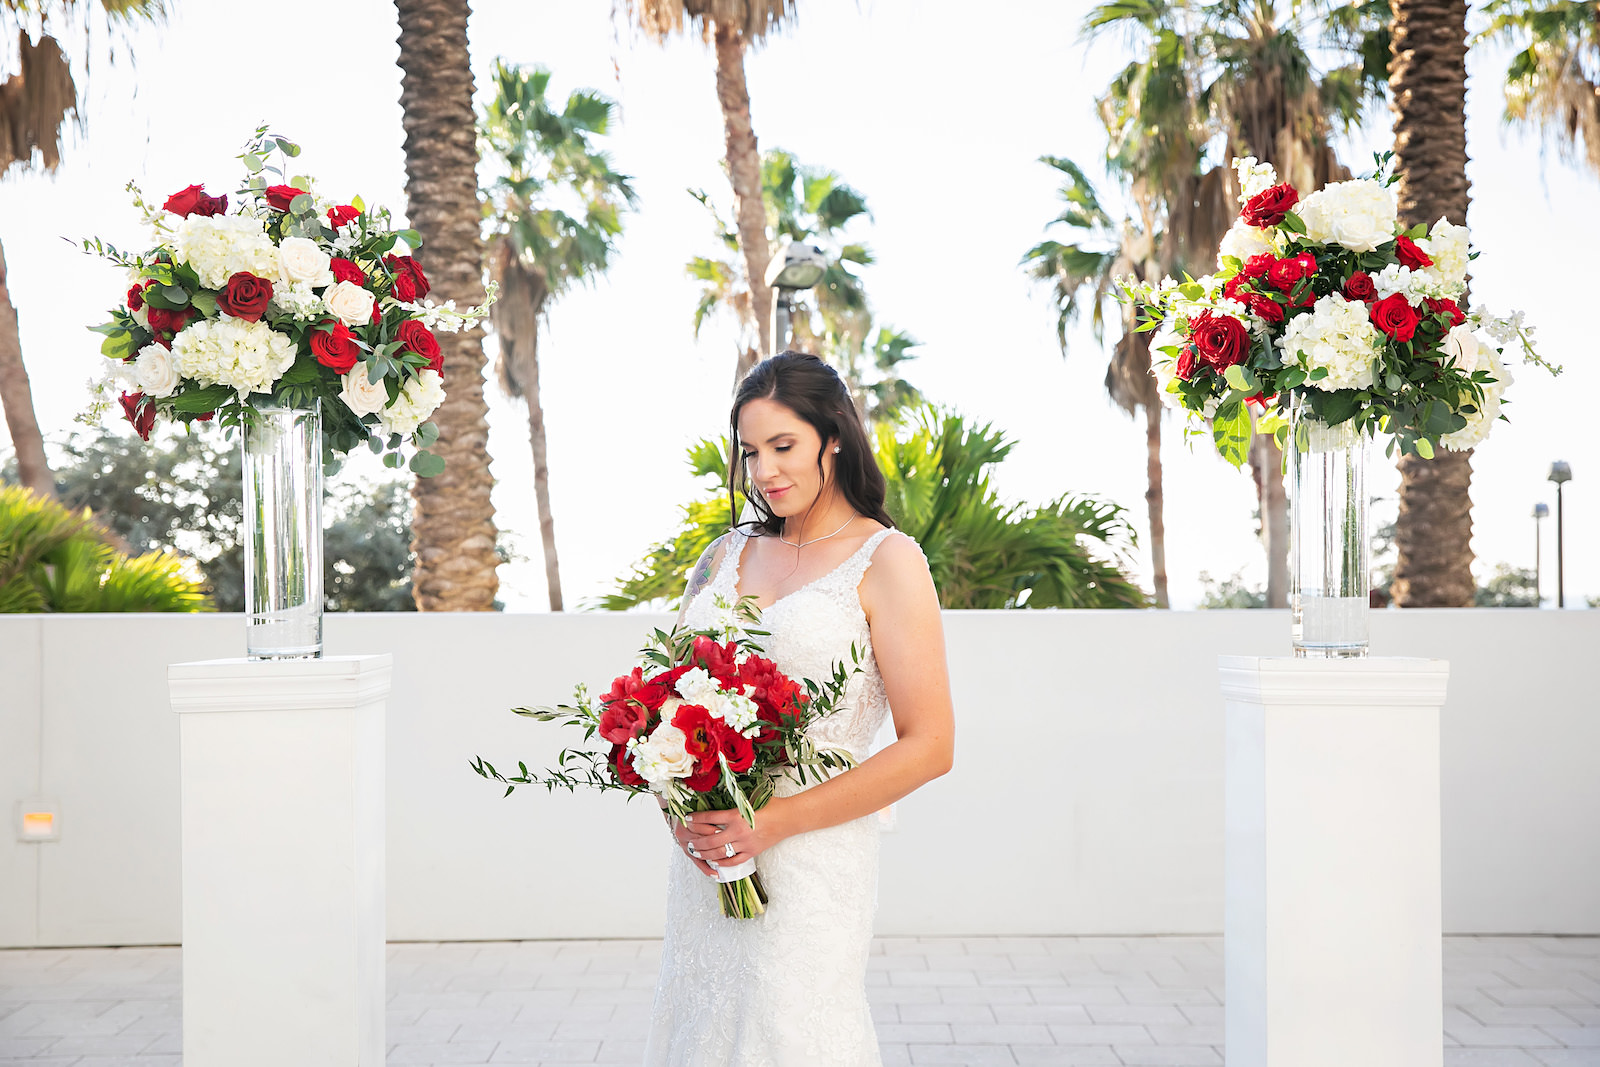 Bridal Portrait in Front of the Alter | Florida Wedding Photographer Limelight Photography | Save the Date Florida Wedding Florist